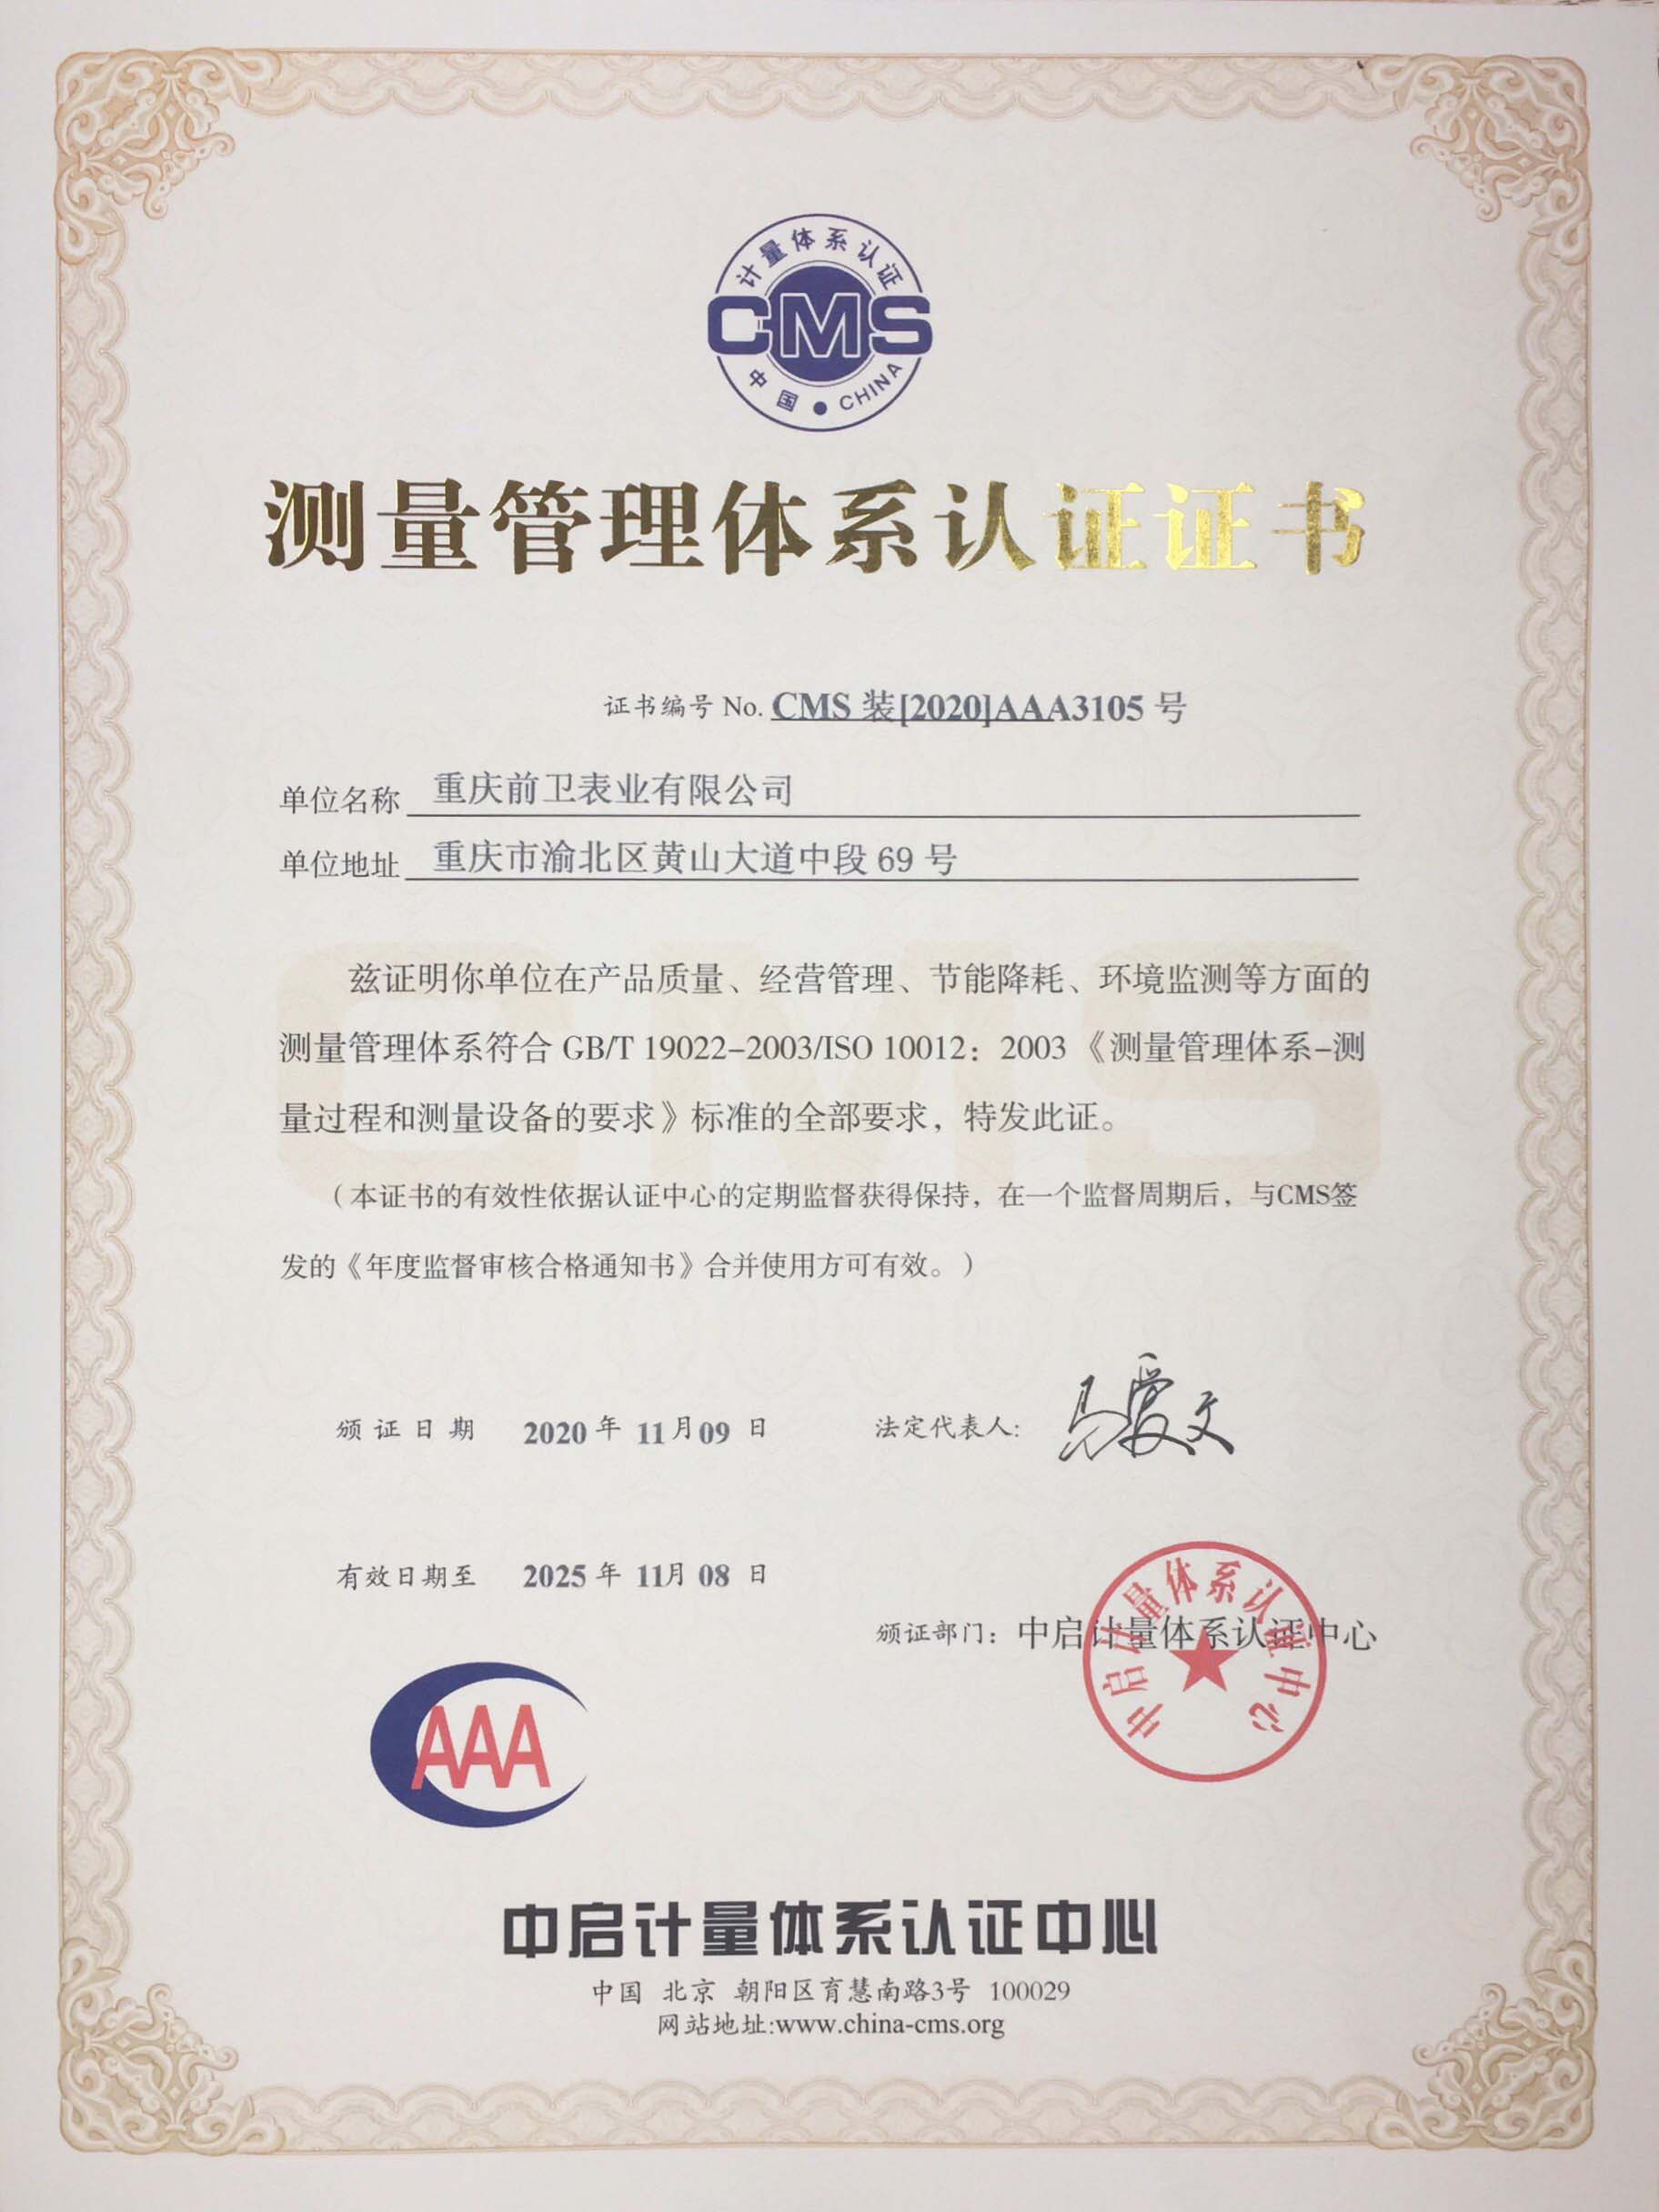 Qianwei Meters(chongqing) Co.,Ltd Obtained AAA certificate of measurement management system